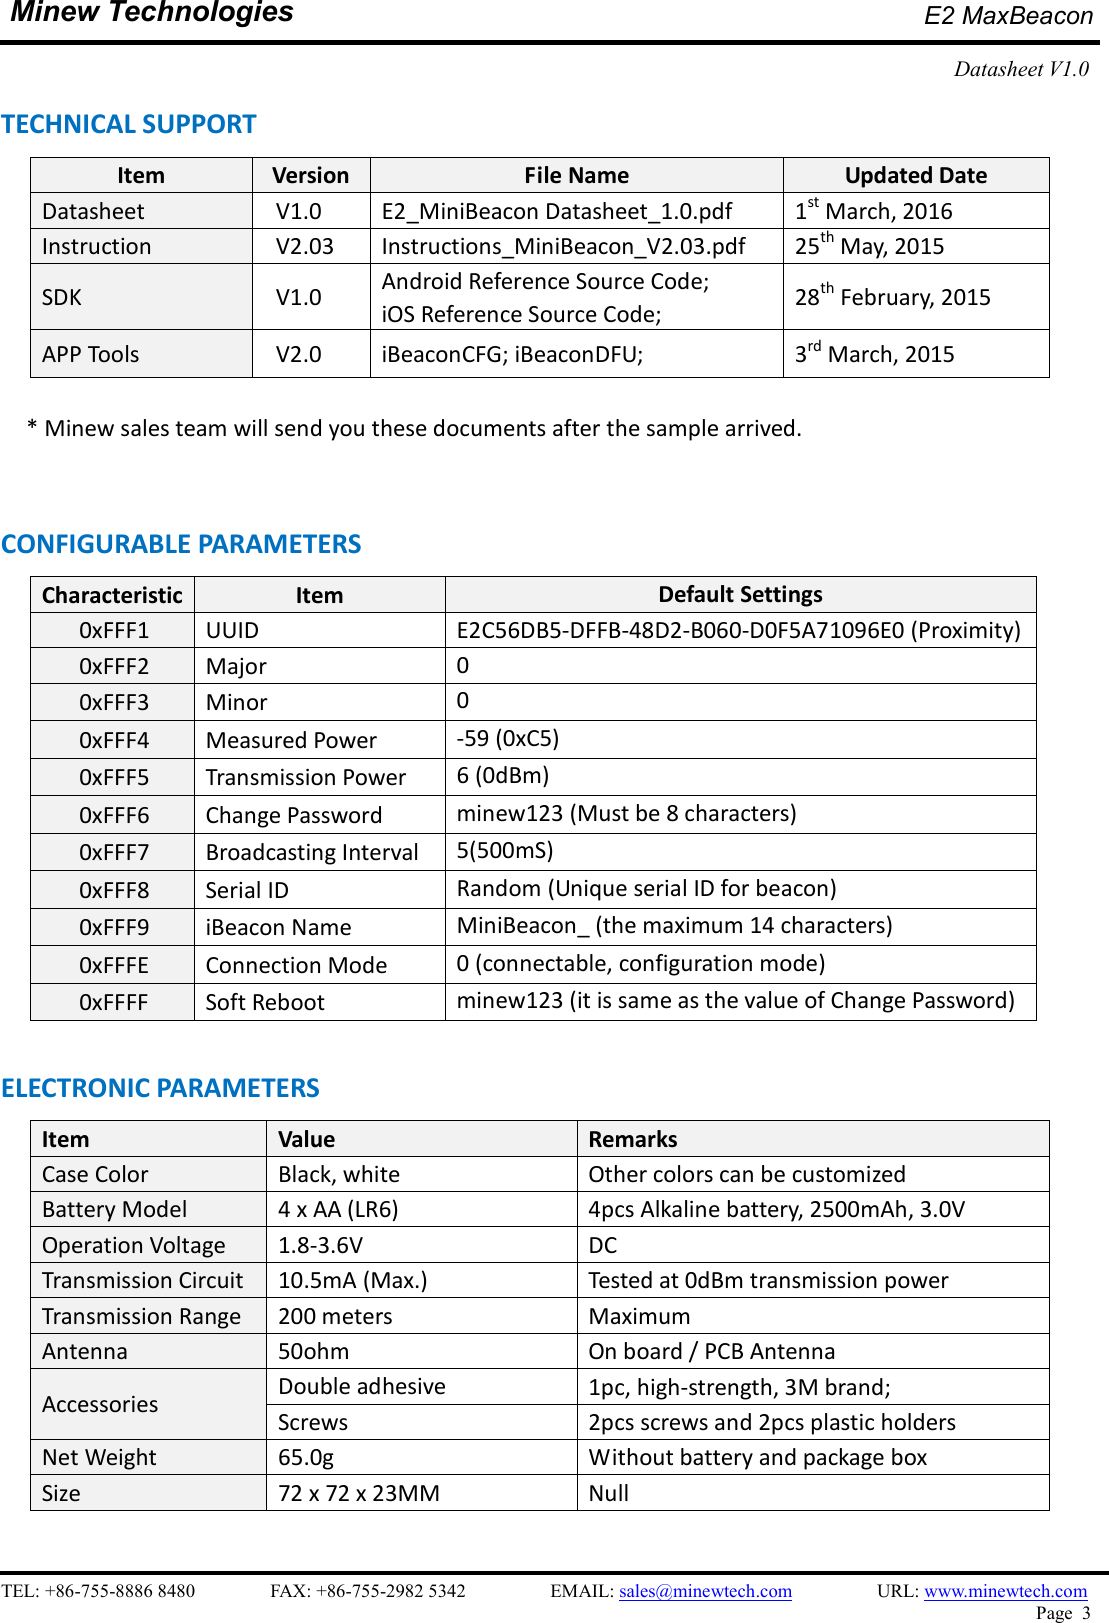    TEL: +86-755-8886 8480                FAX: +86-755-2982 5342                  EMAIL: sales@minewtech.com                  URL: www.minewtech.com Page  3  Minew Technologies E2 MaxBeacon   Datasheet V1.0    TECHNICAL SUPPORT Item  Version  File Name  Updated Date Datasheet  V1.0  E2_MiniBeacon Datasheet_1.0.pdf  1st March, 2016 Instruction  V2.03  Instructions_MiniBeacon_V2.03.pdf  25th May, 2015 SDK    V1.0  Android Reference Source Code;   iOS Reference Source Code;  28th February, 2015 APP Tools    V2.0  iBeaconCFG; iBeaconDFU;  3rd March, 2015     * Minew sales team will send you these documents after the sample arrived.  CONFIGURABLE PARAMETERS                                                 Characteristic Item  Default Settings 0xFFF1  UUID    E2C56DB5-DFFB-48D2-B060-D0F5A71096E0 (Proximity)       0xFFF2  Major  0       0xFFF3  Minor  0       0xFFF4  Measured Power  -59 (0xC5)       0xFFF5  Transmission Power  6 (0dBm)       0xFFF6  Change Password  minew123 (Must be 8 characters)       0xFFF7  Broadcasting Interval  5(500mS)       0xFFF8  Serial ID  Random (Unique serial ID for beacon)       0xFFF9  iBeacon Name  MiniBeacon_ (the maximum 14 characters)       0xFFFE  Connection Mode  0 (connectable, configuration mode)       0xFFFF  Soft Reboot    minew123 (it is same as the value of Change Password)  ELECTRONIC PARAMETERS Item    Value  Remarks Case Color  Black, white  Other colors can be customized Battery Model  4 x AA (LR6)  4pcs Alkaline battery, 2500mAh, 3.0V Operation Voltage  1.8-3.6V  DC Transmission Circuit  10.5mA (Max.)  Tested at 0dBm transmission power Transmission Range  200 meters  Maximum Antenna  50ohm  On board / PCB Antenna Accessories  Double adhesive  1pc, high-strength, 3M brand; Screws  2pcs screws and 2pcs plastic holders Net Weight  65.0g  Without battery and package box Size  72 x 72 x 23MM  Null  